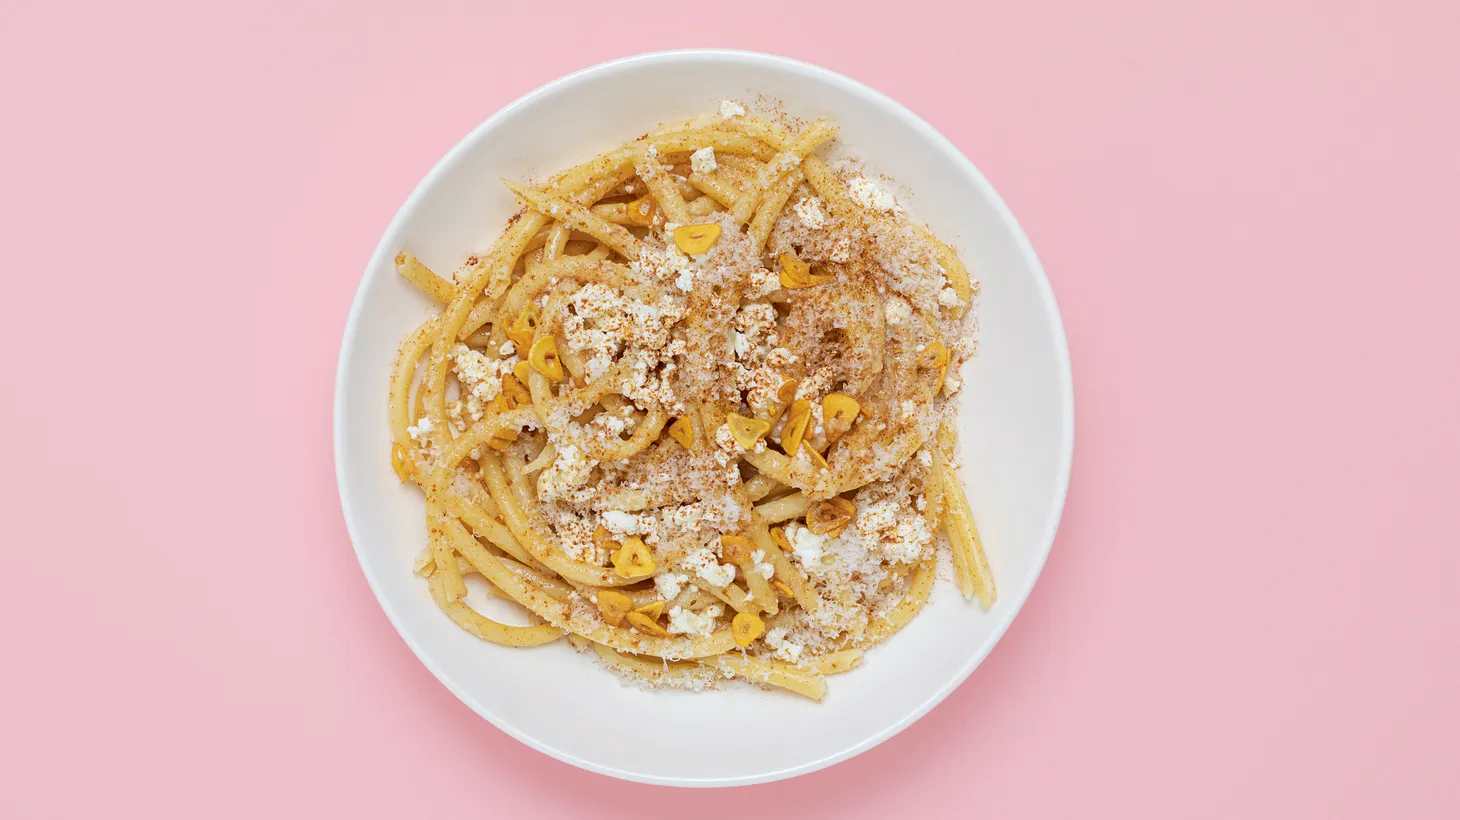 Pasta Yiayia, a deceptively easy pasta dish of bucatini, brown butter, cinnamon, feta, and garlic, has a Greek spin.